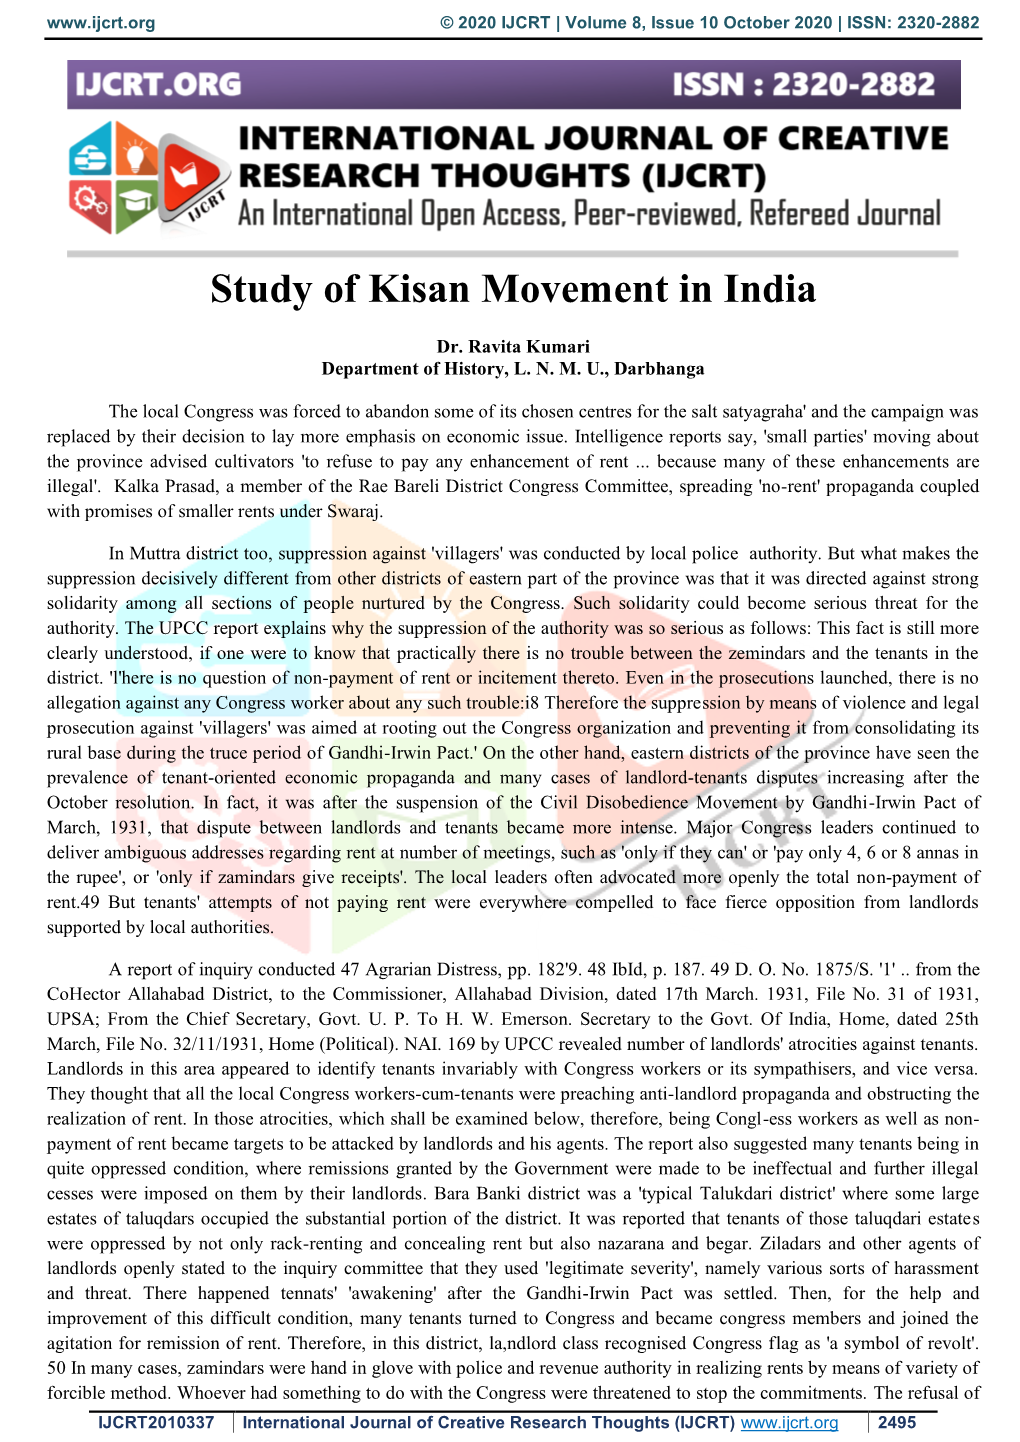 Study of Kisan Movement in India